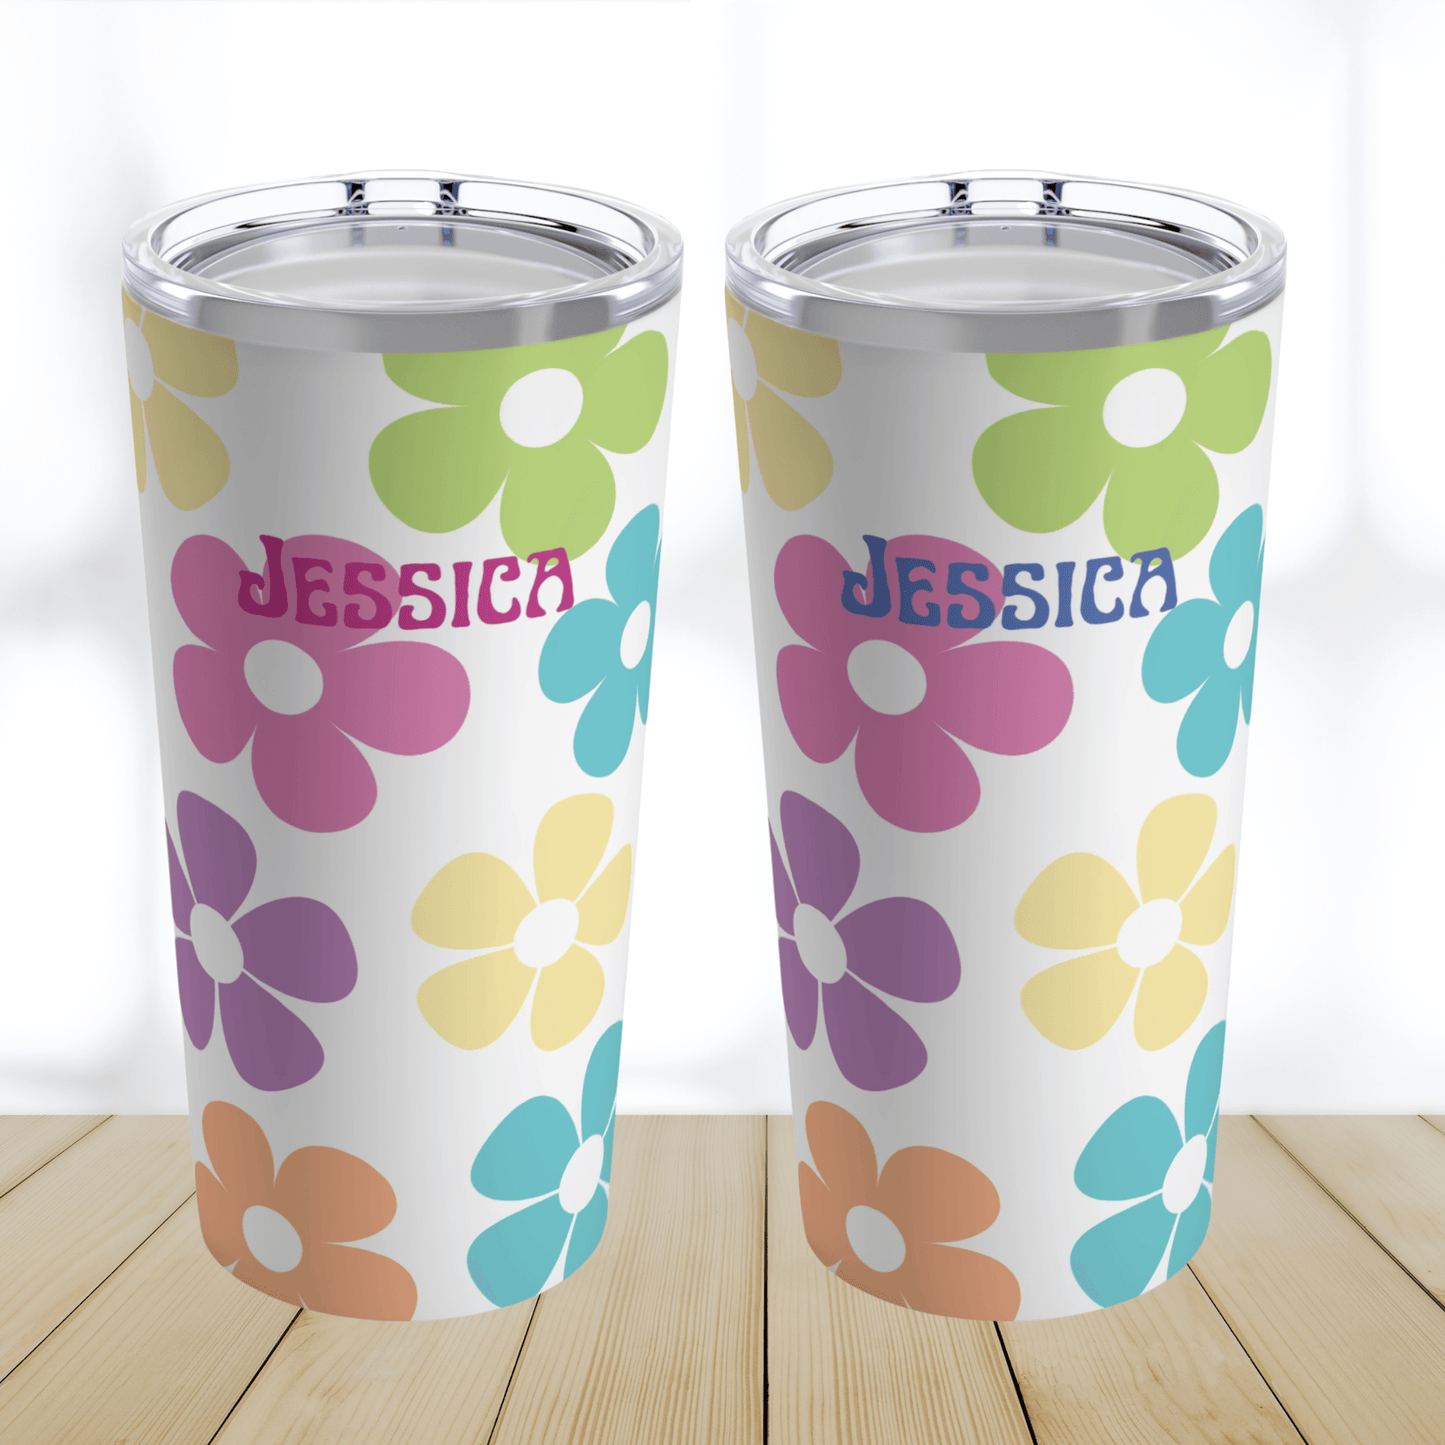 You can personalize your tumbler with a vintage feel font and put your name in either pink or blue on the front.